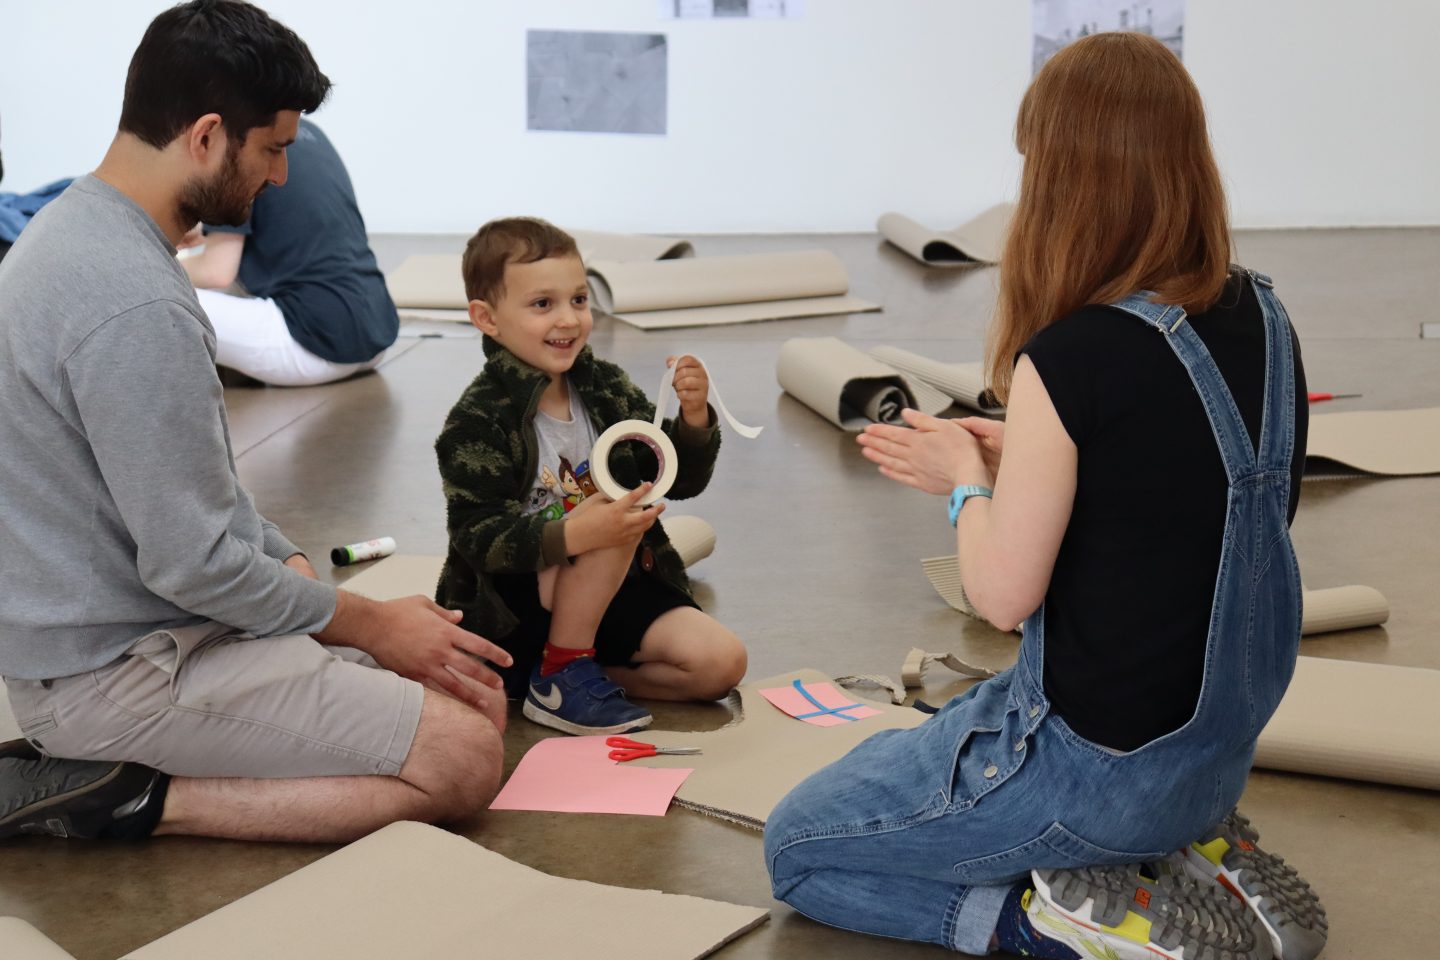 A young child taking part in an art workshop